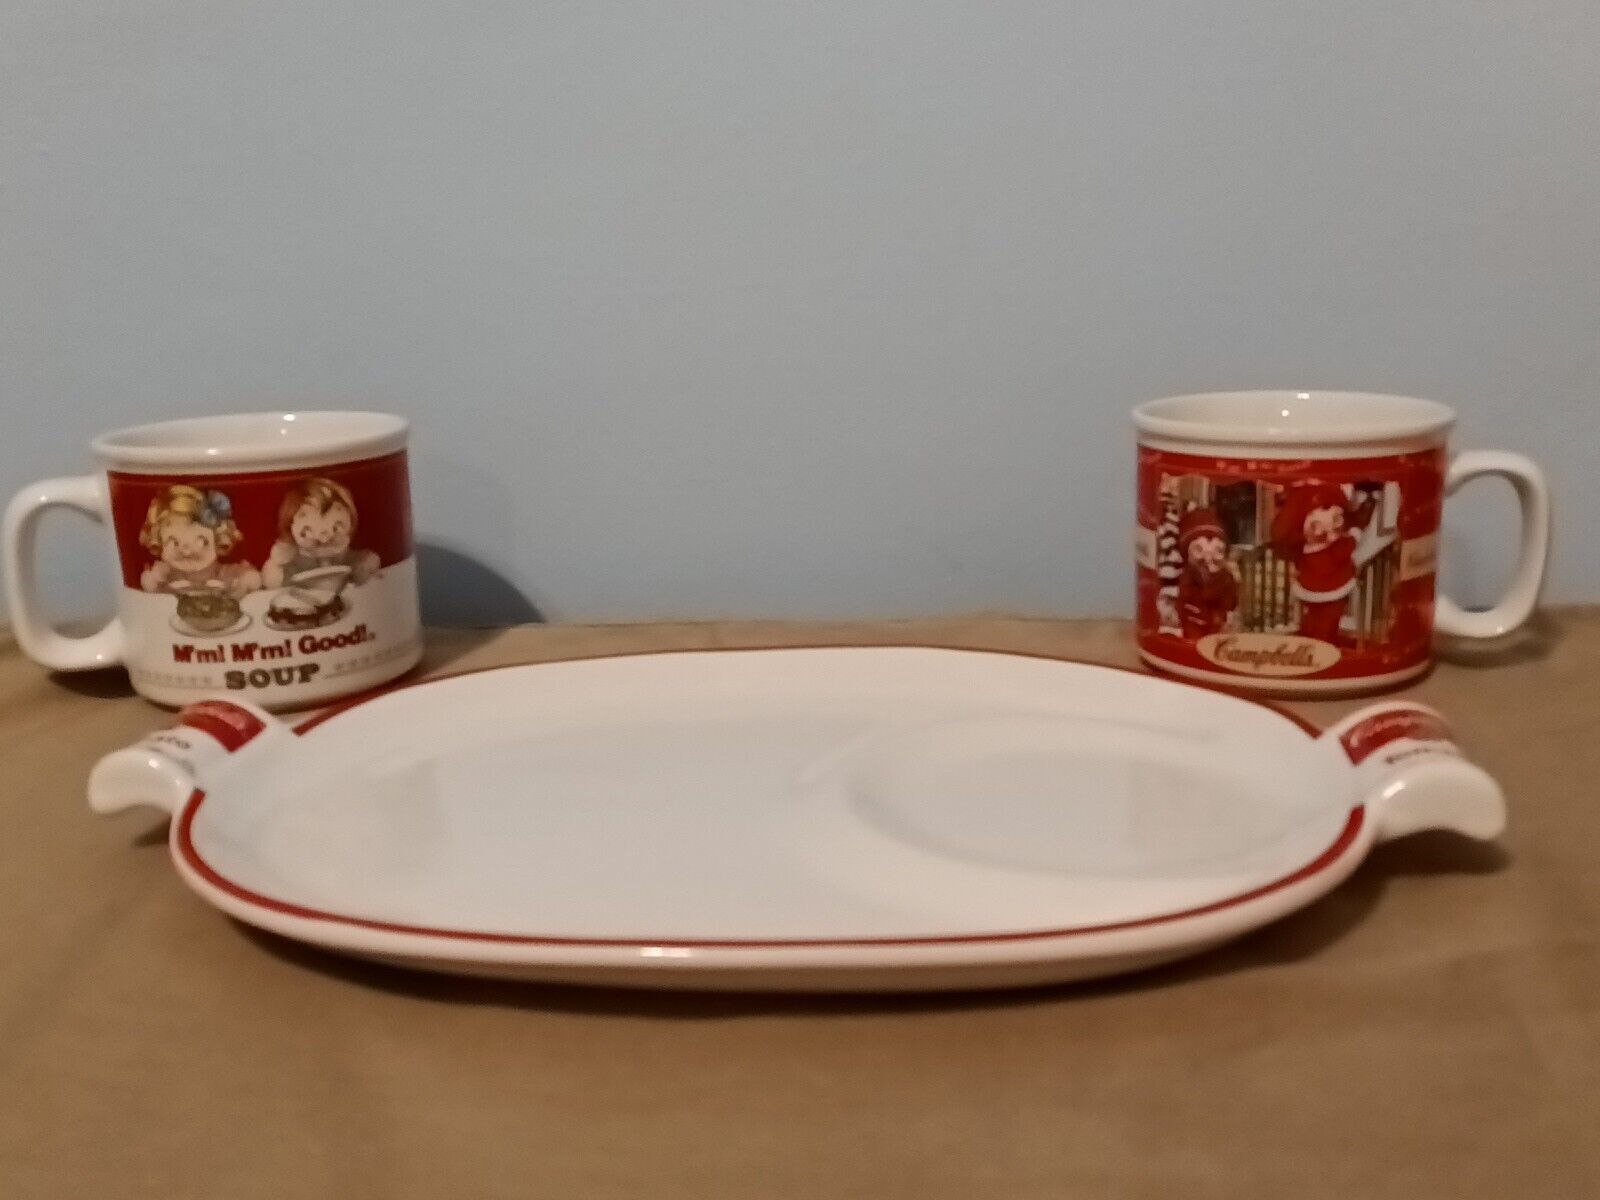 Vintage Campbell’s Tomato Soup Cup/Mug and Plate/Tray Set